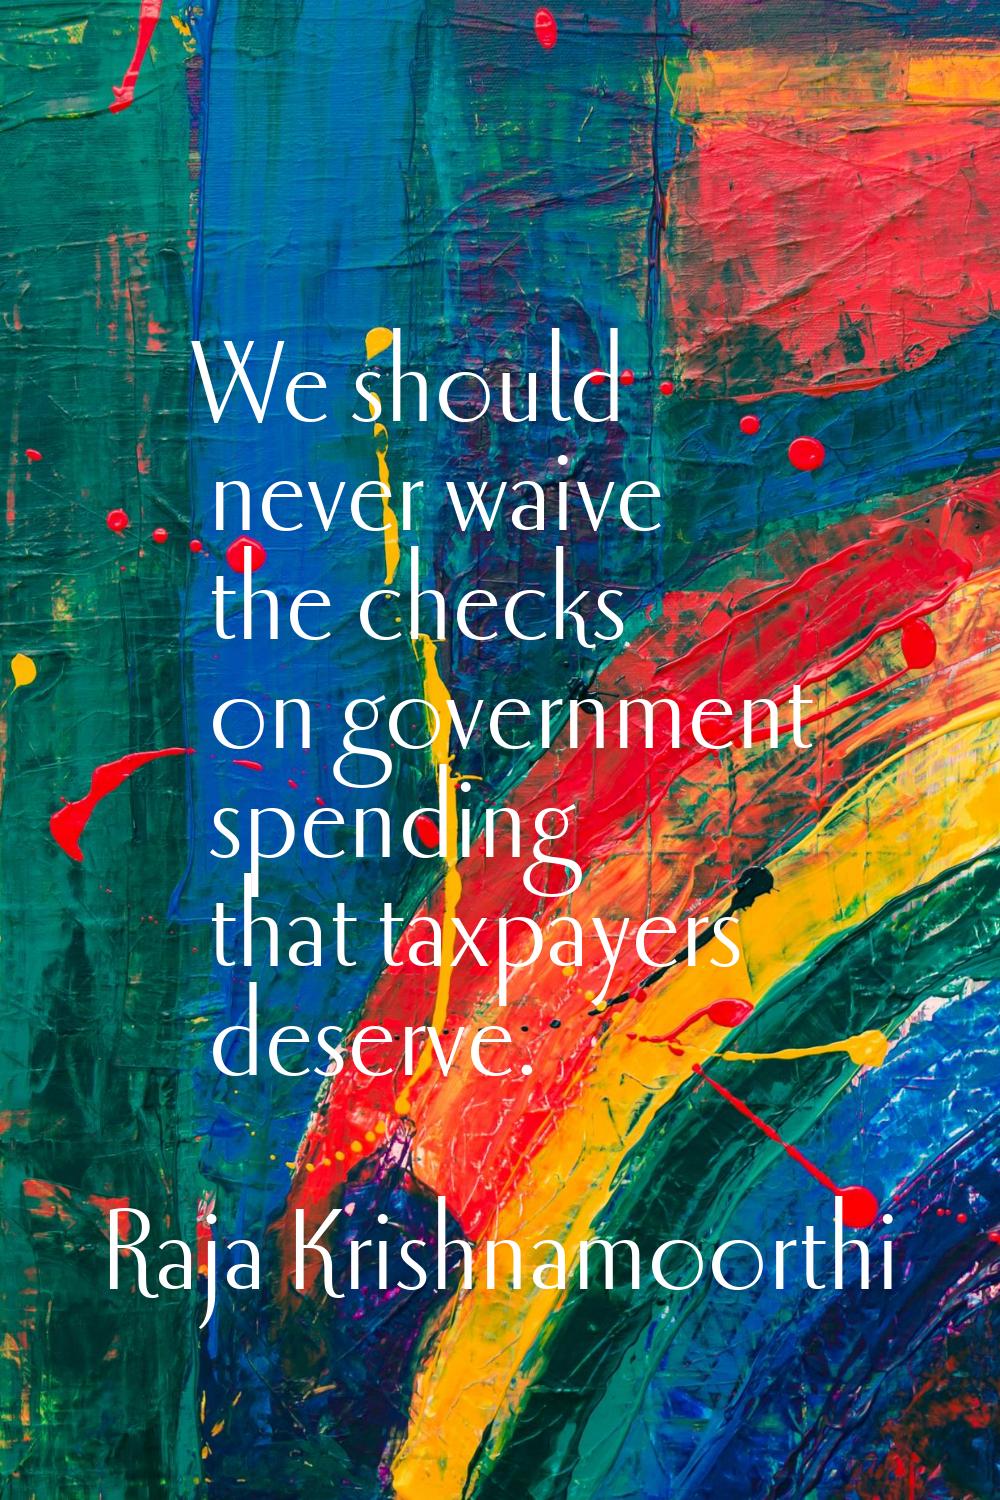 We should never waive the checks on government spending that taxpayers deserve.